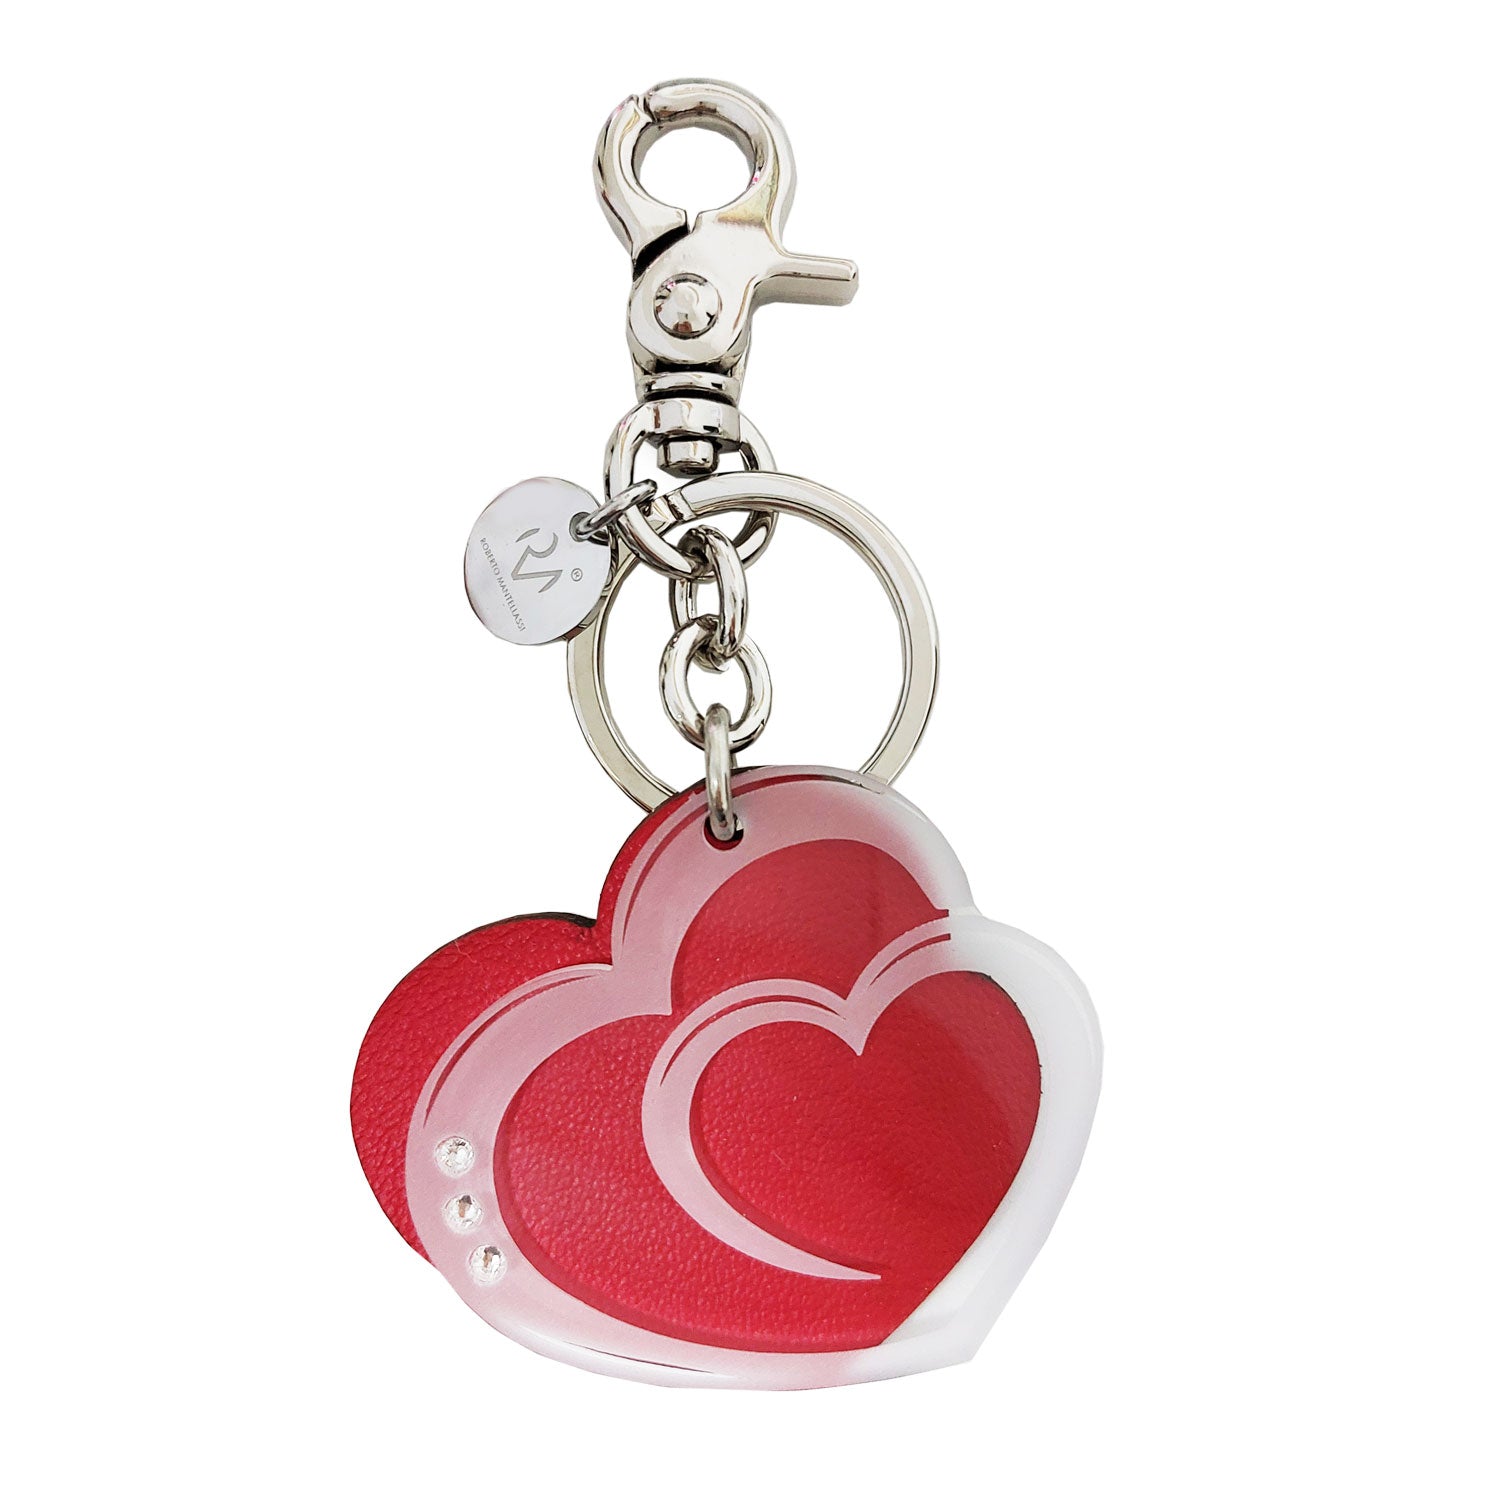 Heart Keychain in Genuine Leather and Plexiglass for Women